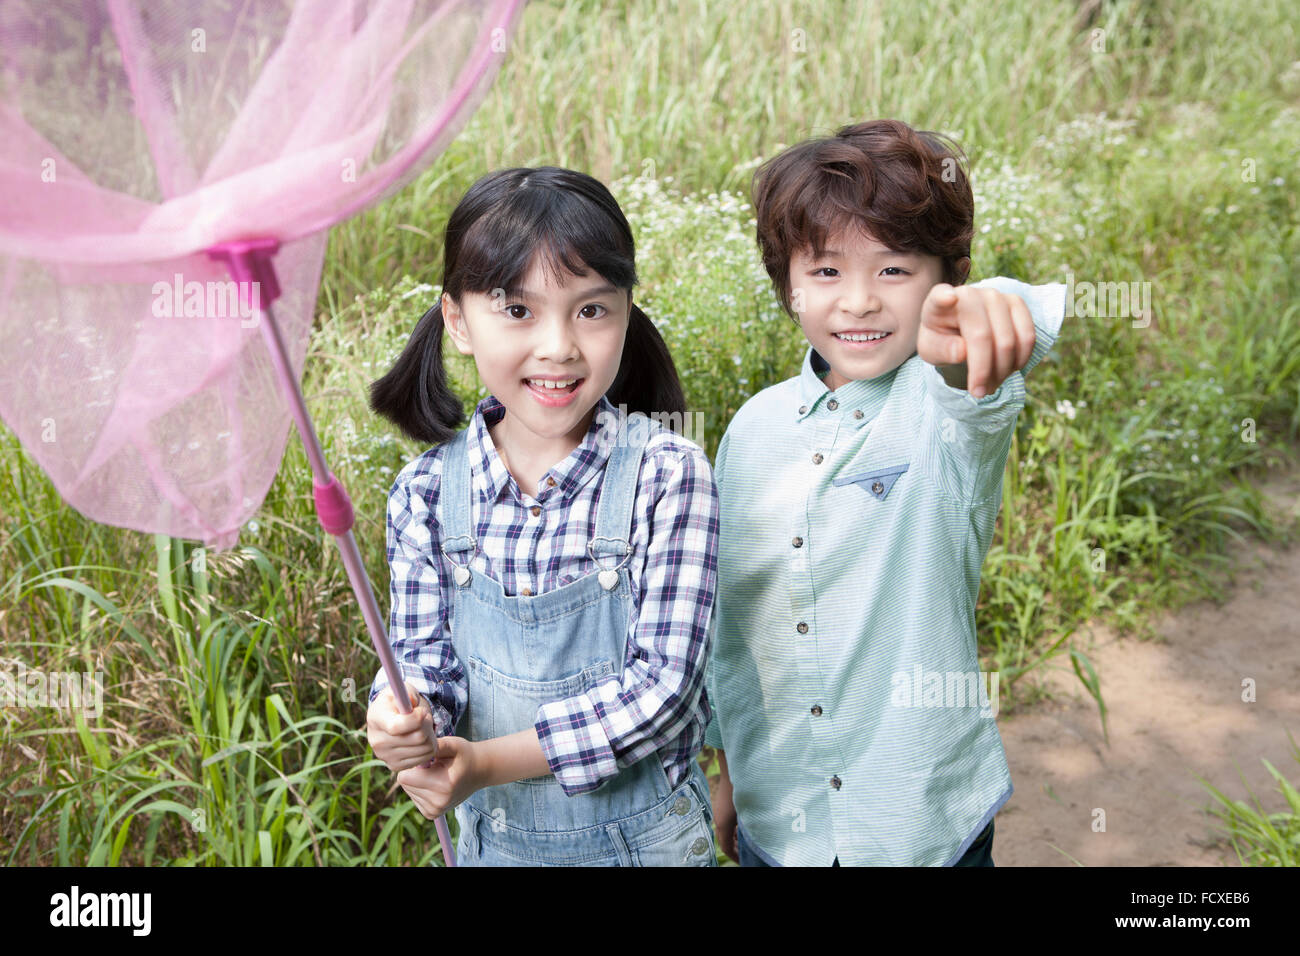 Two kids staring forward with a smile with a butterfly net at the grass field and the boy pointing with his finger forwards Stock Photo